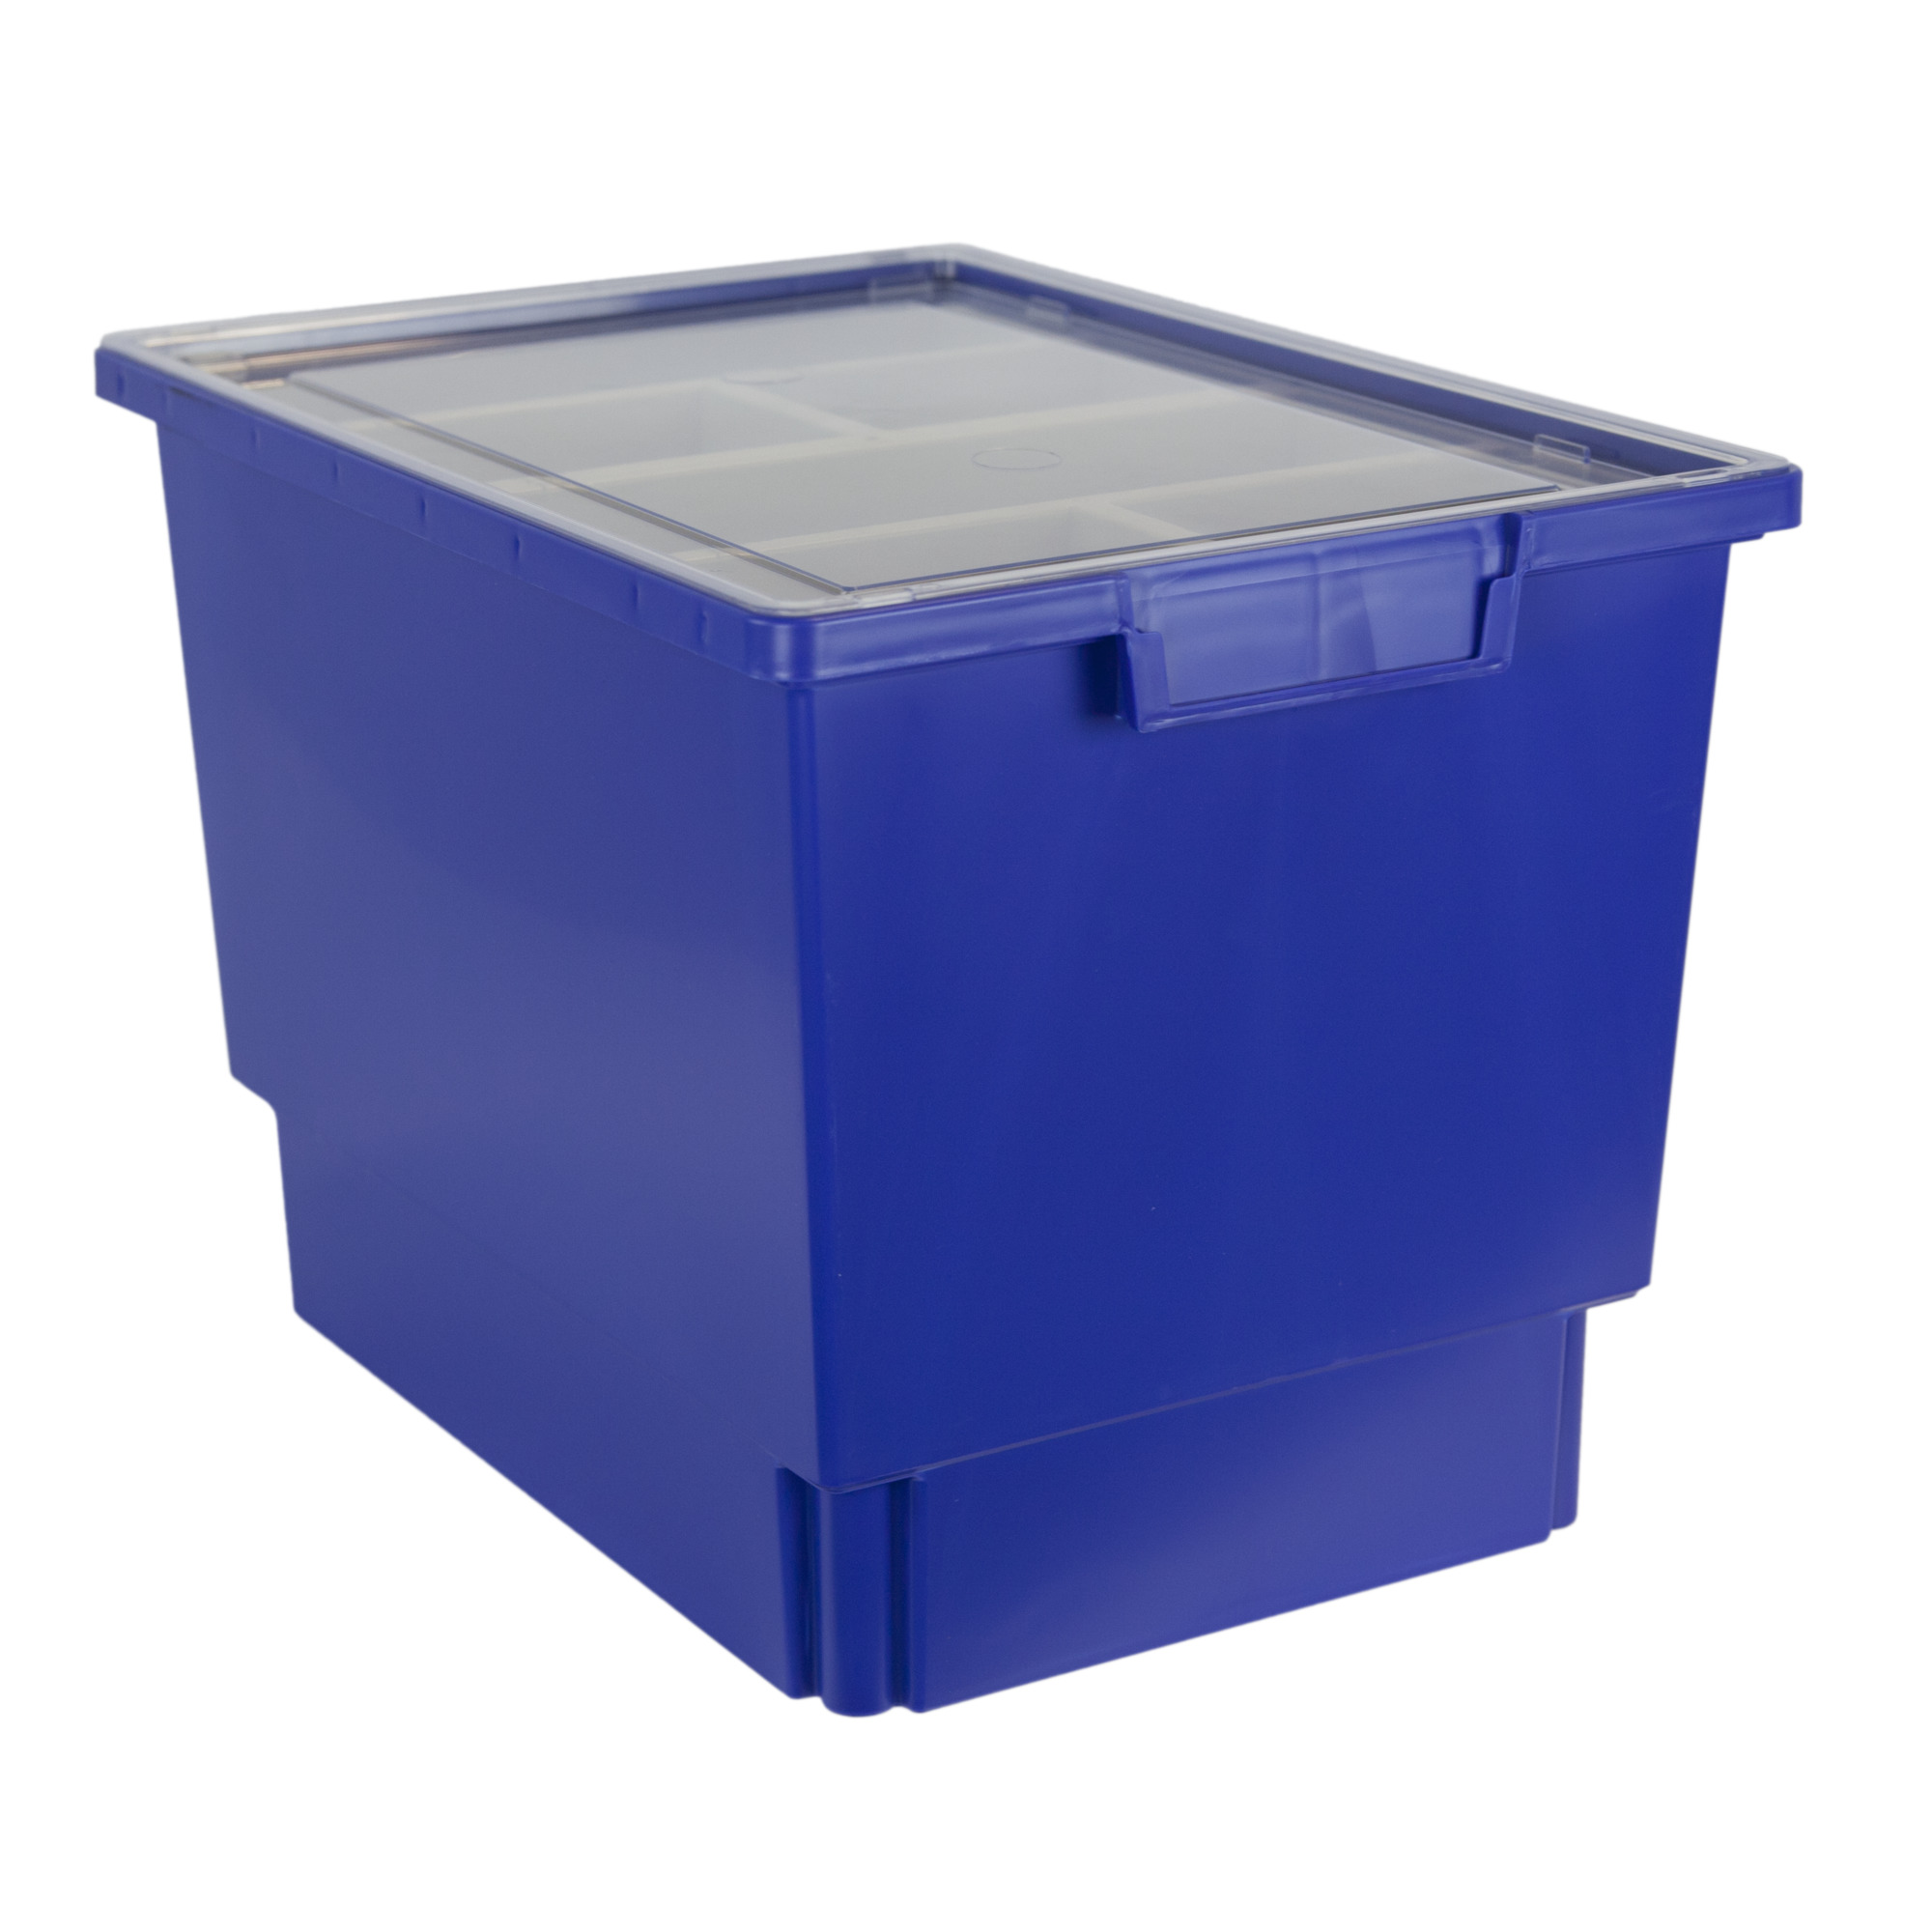 Certwood StorWerks, Slim Line 12Inch Tray Kit (3 x Divisions) Blue-3PK, Included (qty.) 3, Material Plastic, Height 12 in, Model CE1954PB-NK0202-3